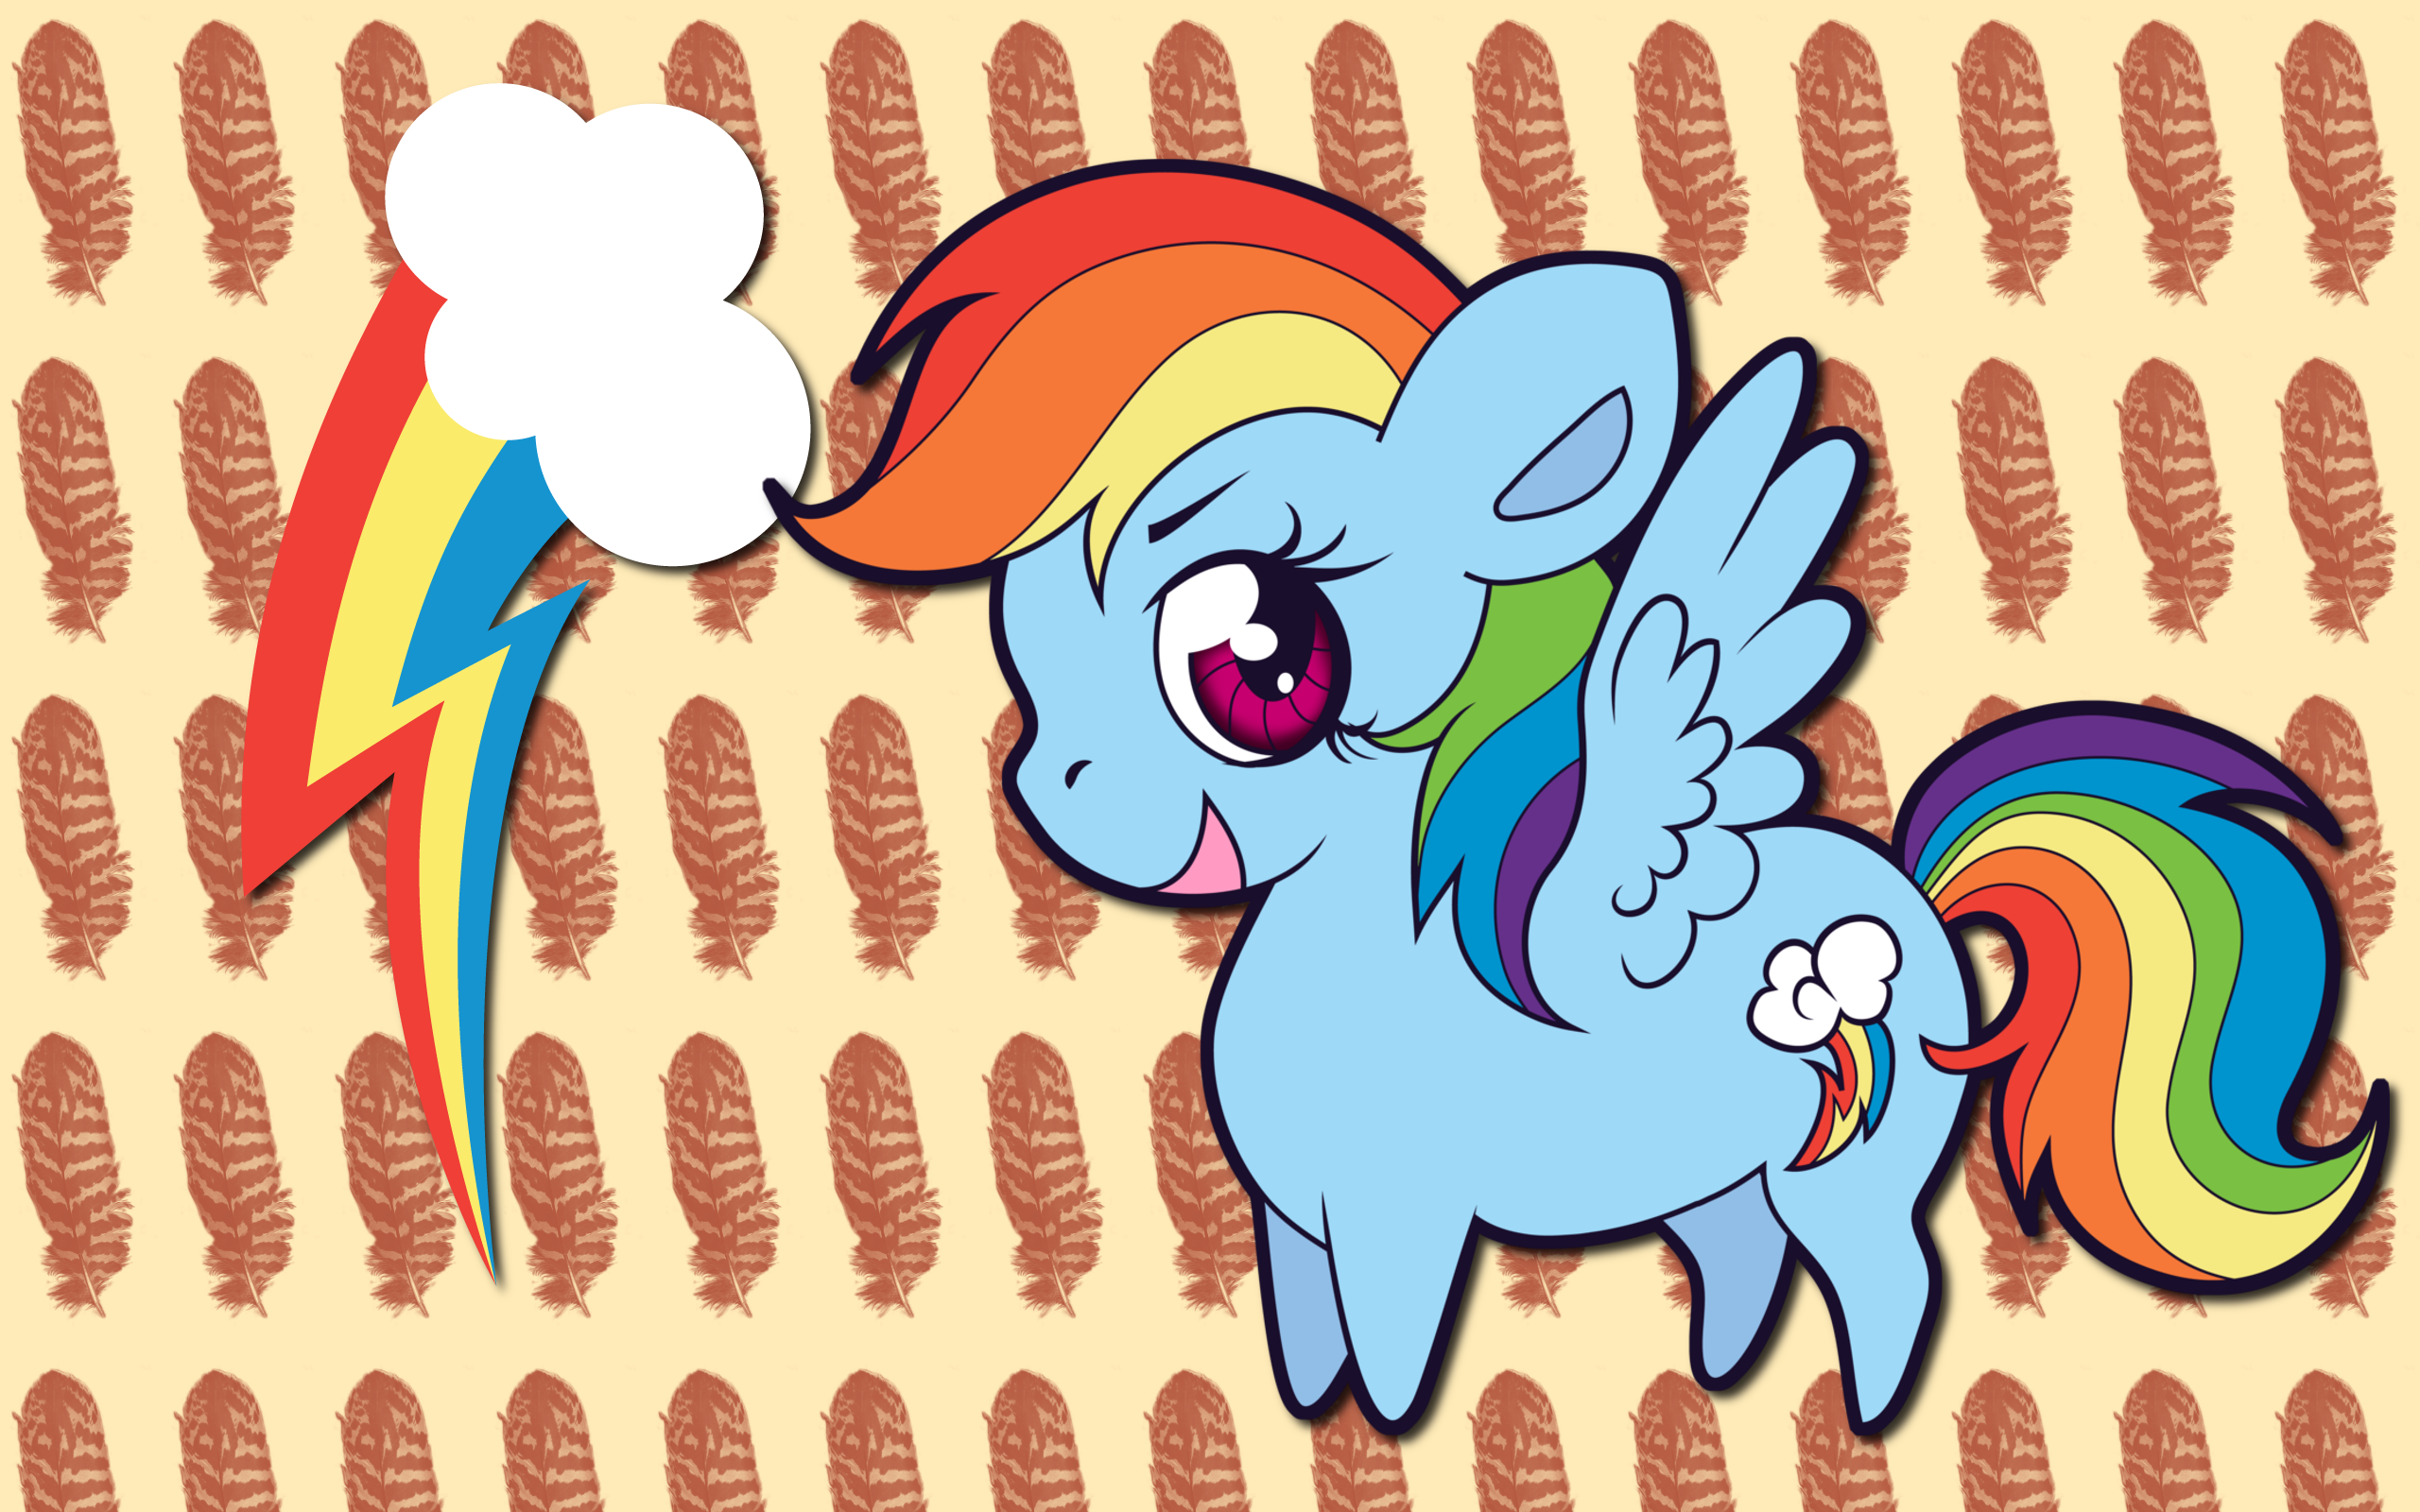 Chibi Rainbow Dash WP by AliceHumanSacrifice0, ooklah and Squeemishness